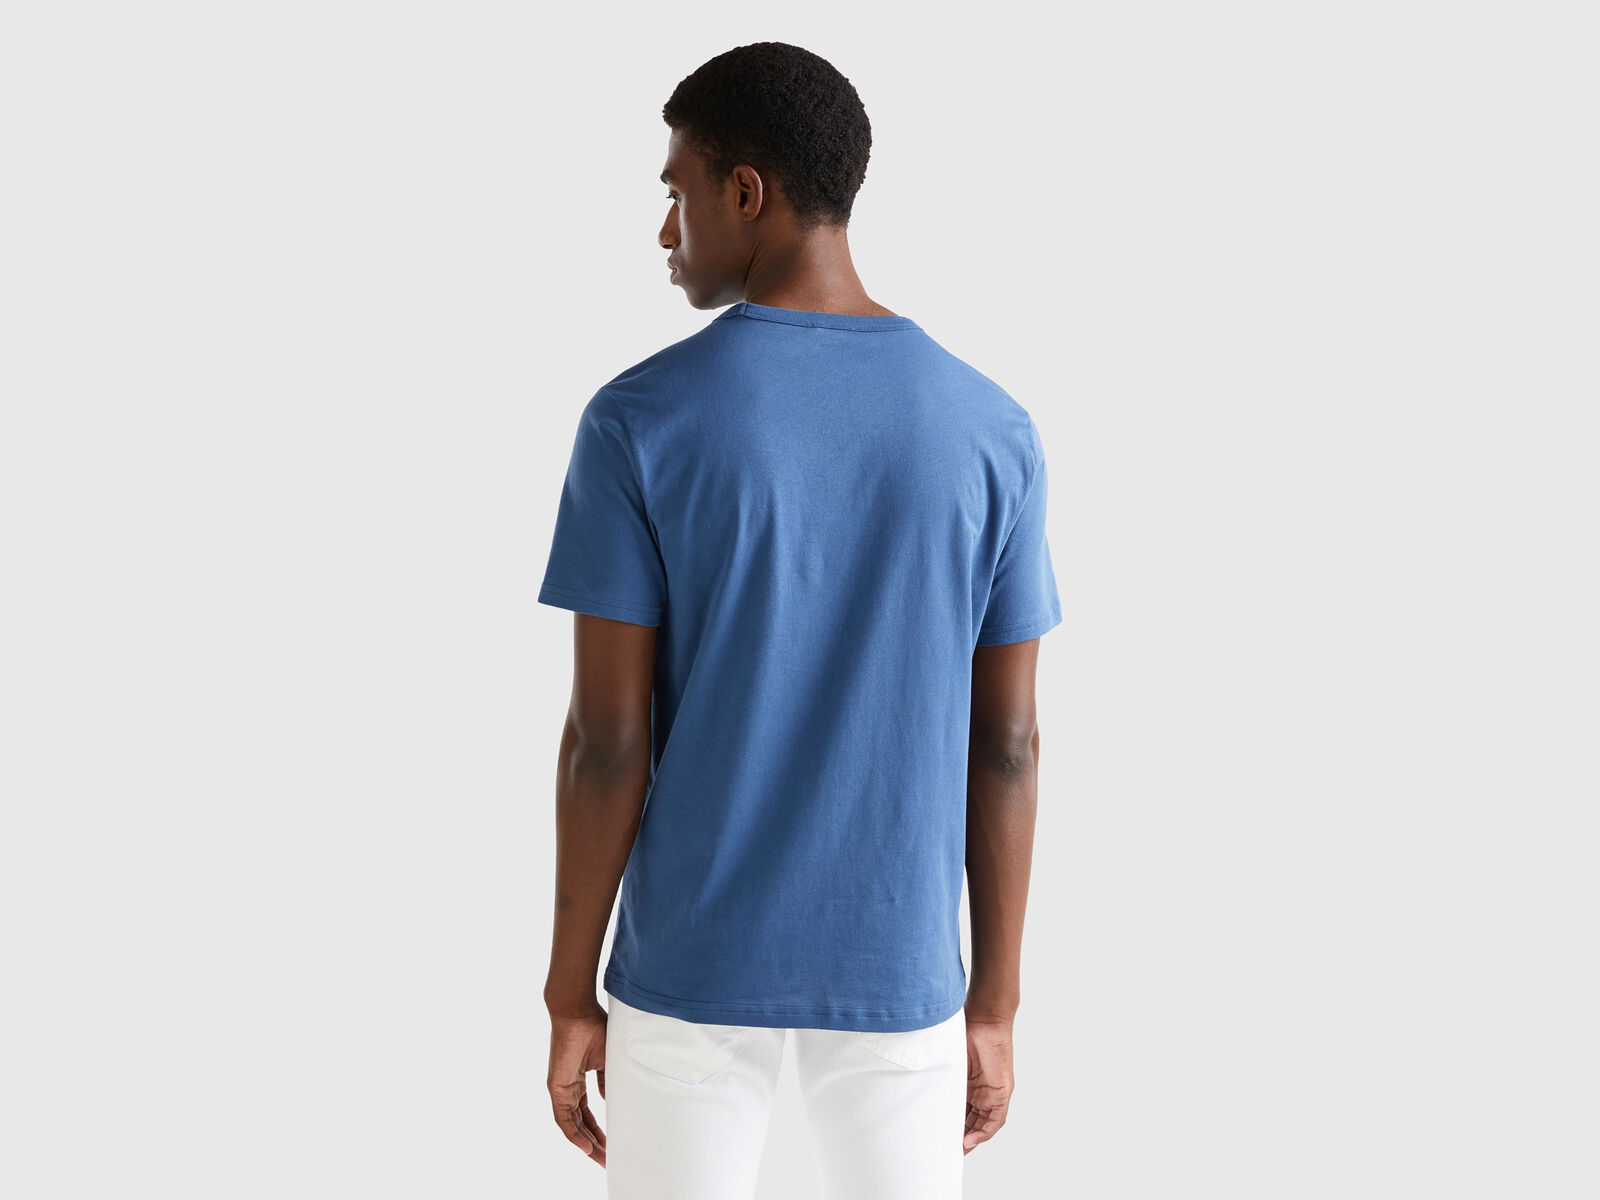 Air force blue t-shirt in print | organic Force logo Benetton - cotton with Blue Air